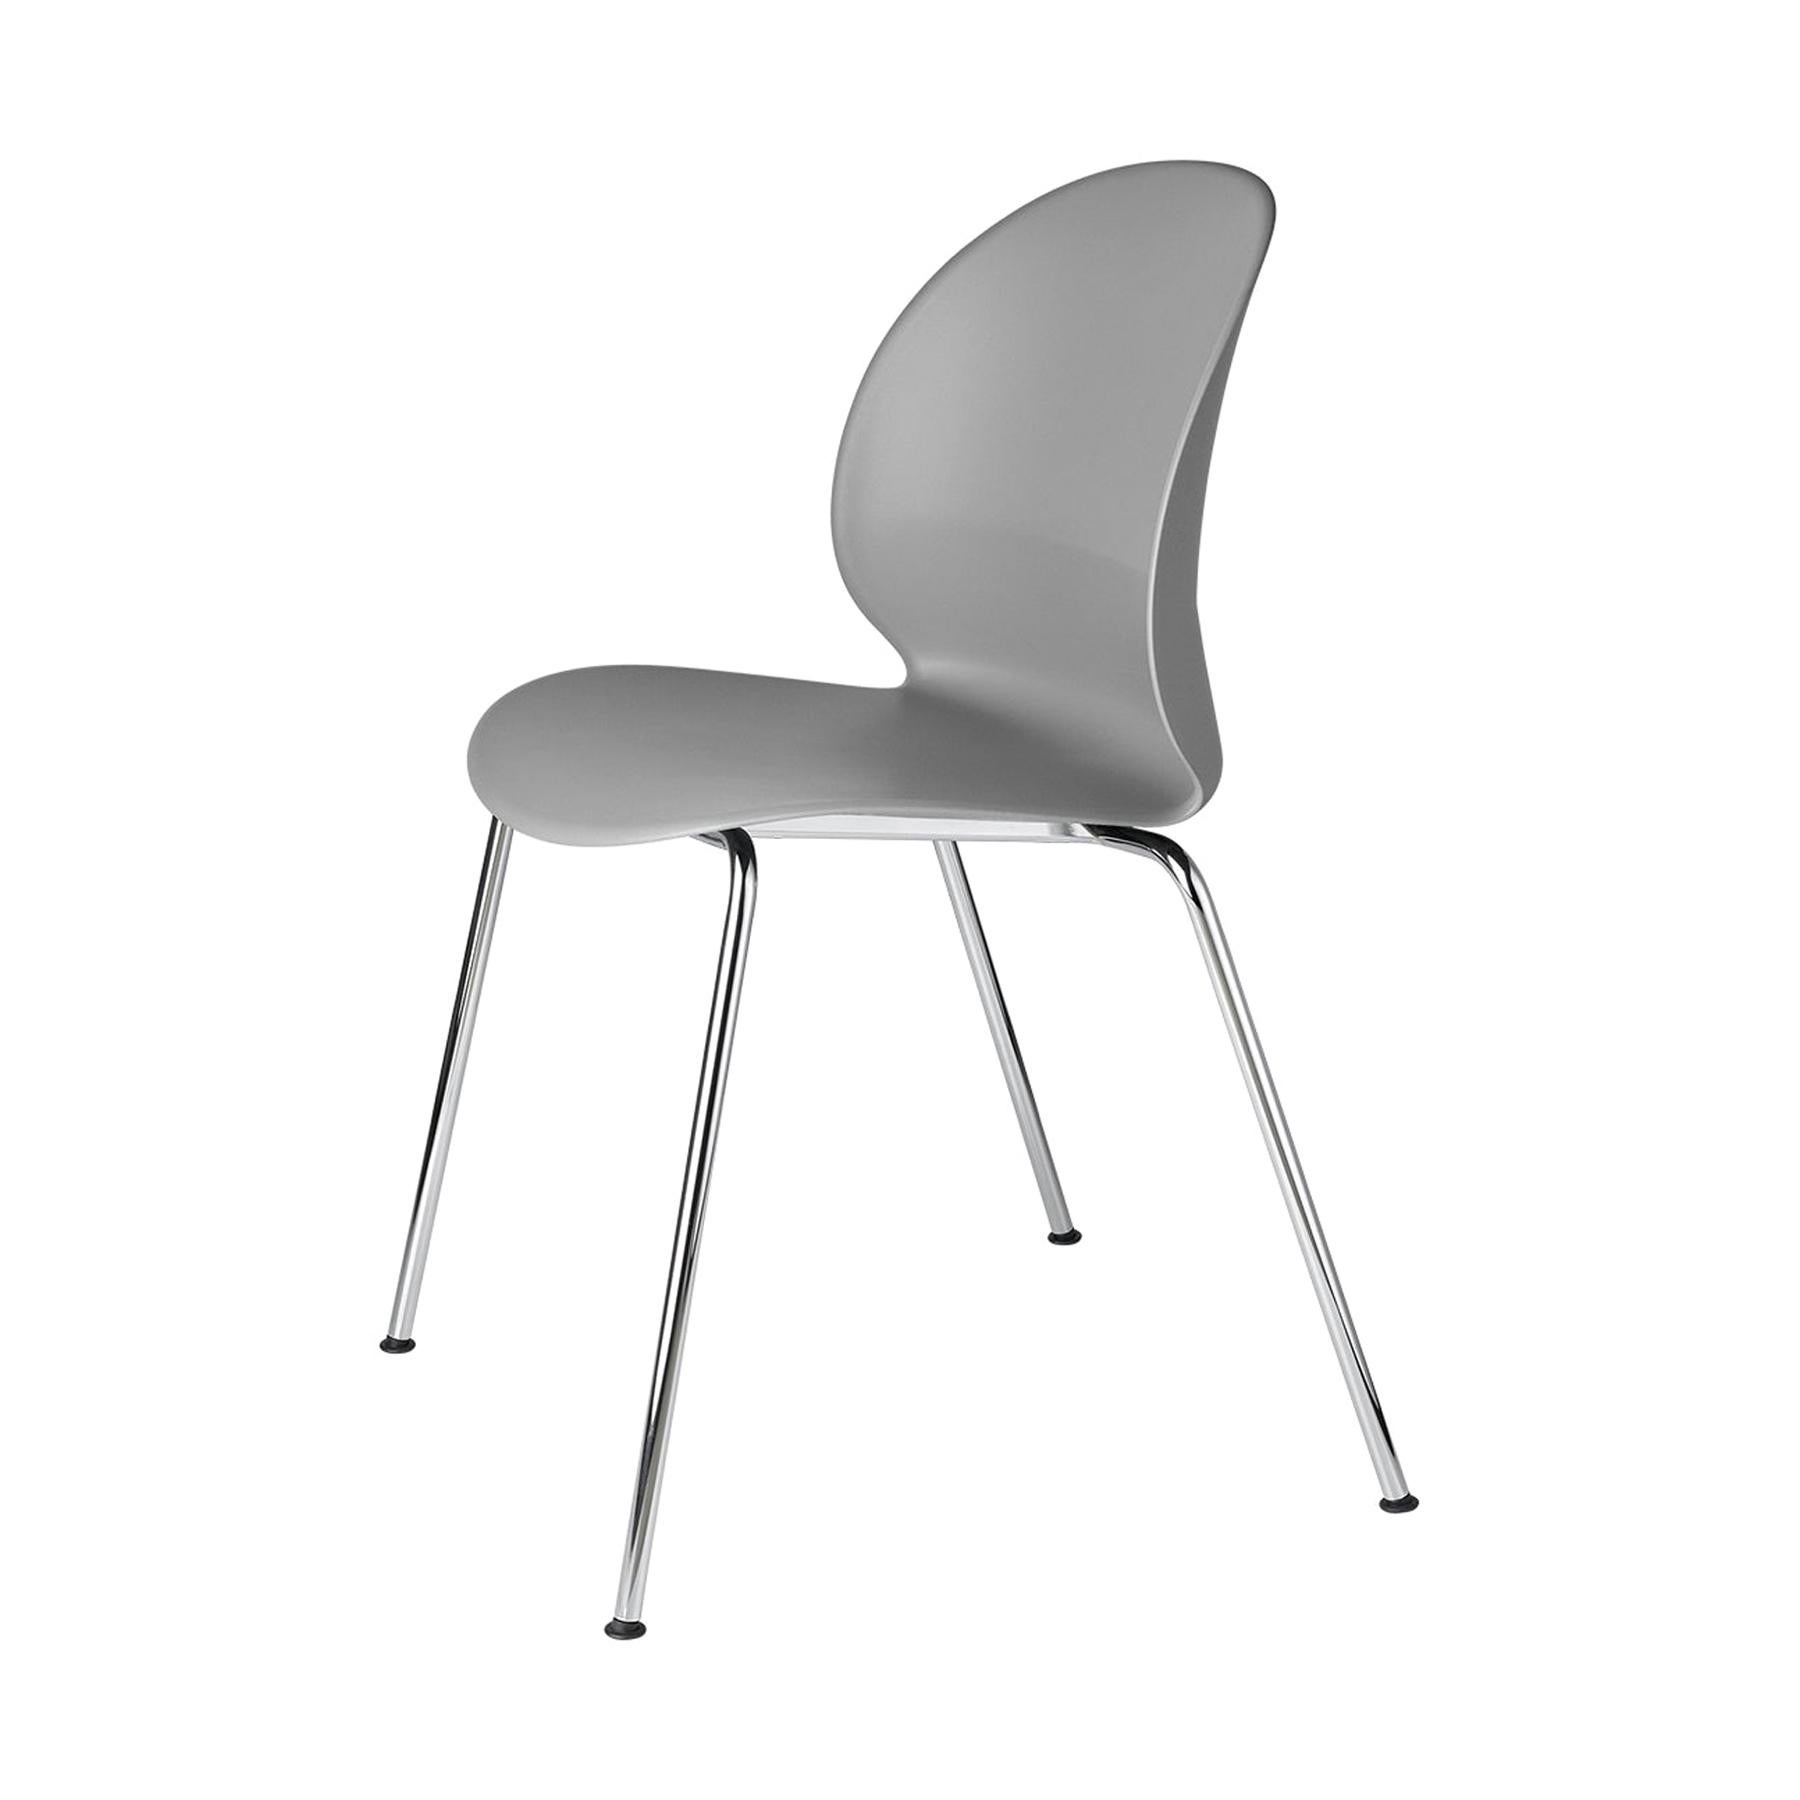 Nando Chair Model N02-10 Recycle For Sale